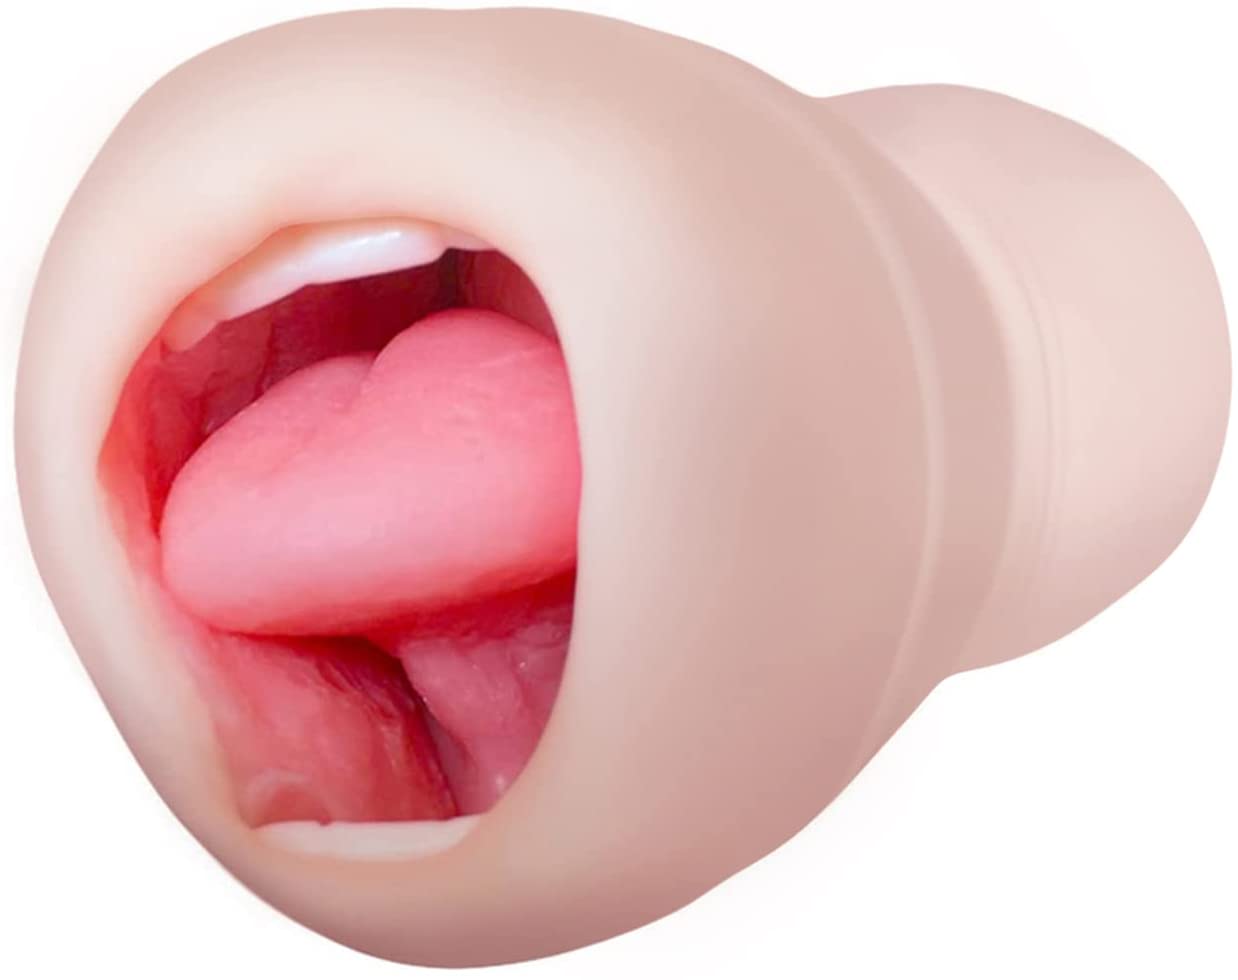 Tracy’s Dog – Blow Job Stroker Realistic Mouth with Teeth and Tongue